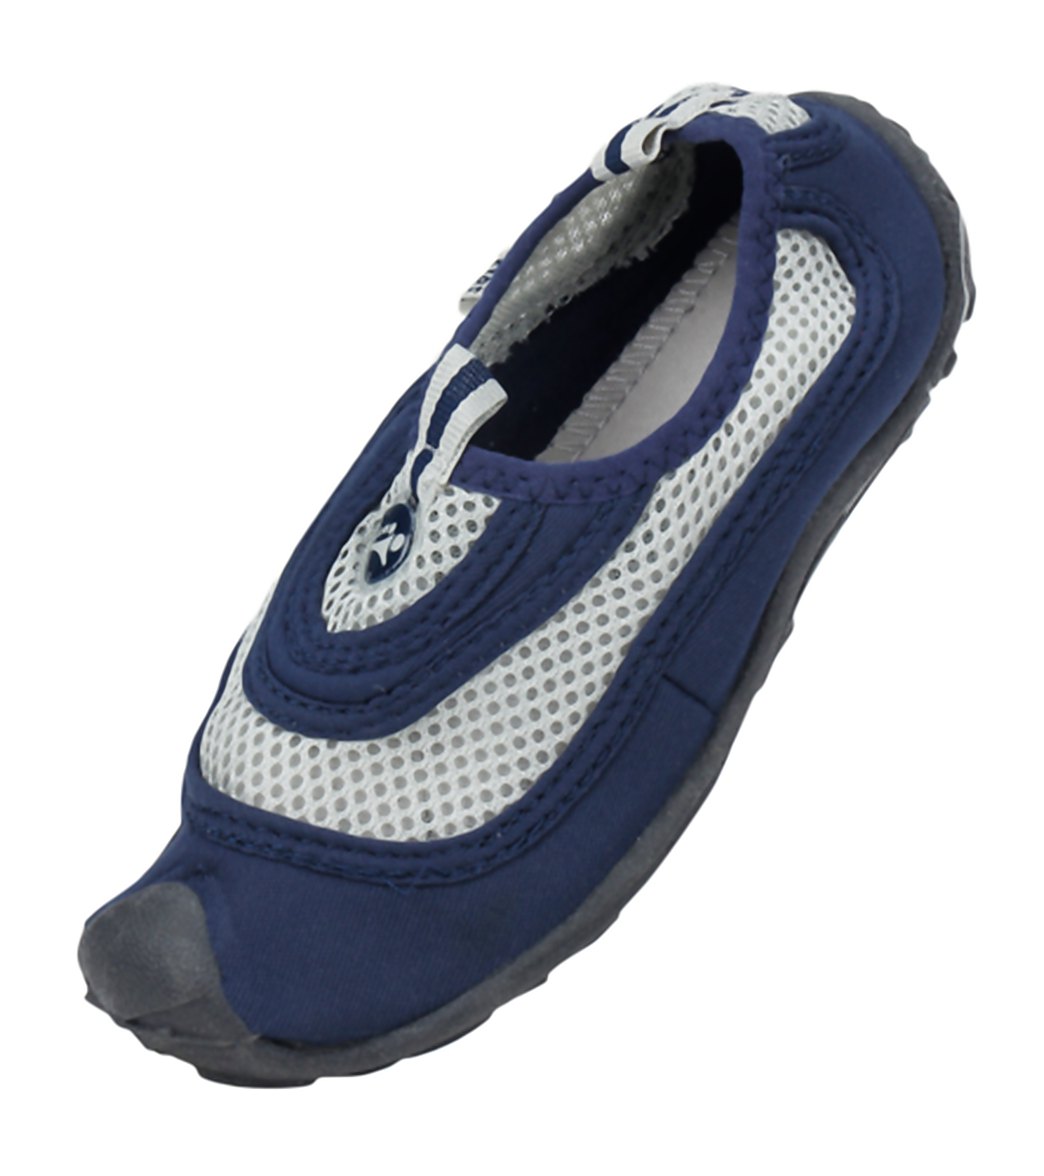 Cudas Youth Flatwater Watershoes - Navy/Grey 13 - Swimoutlet.com